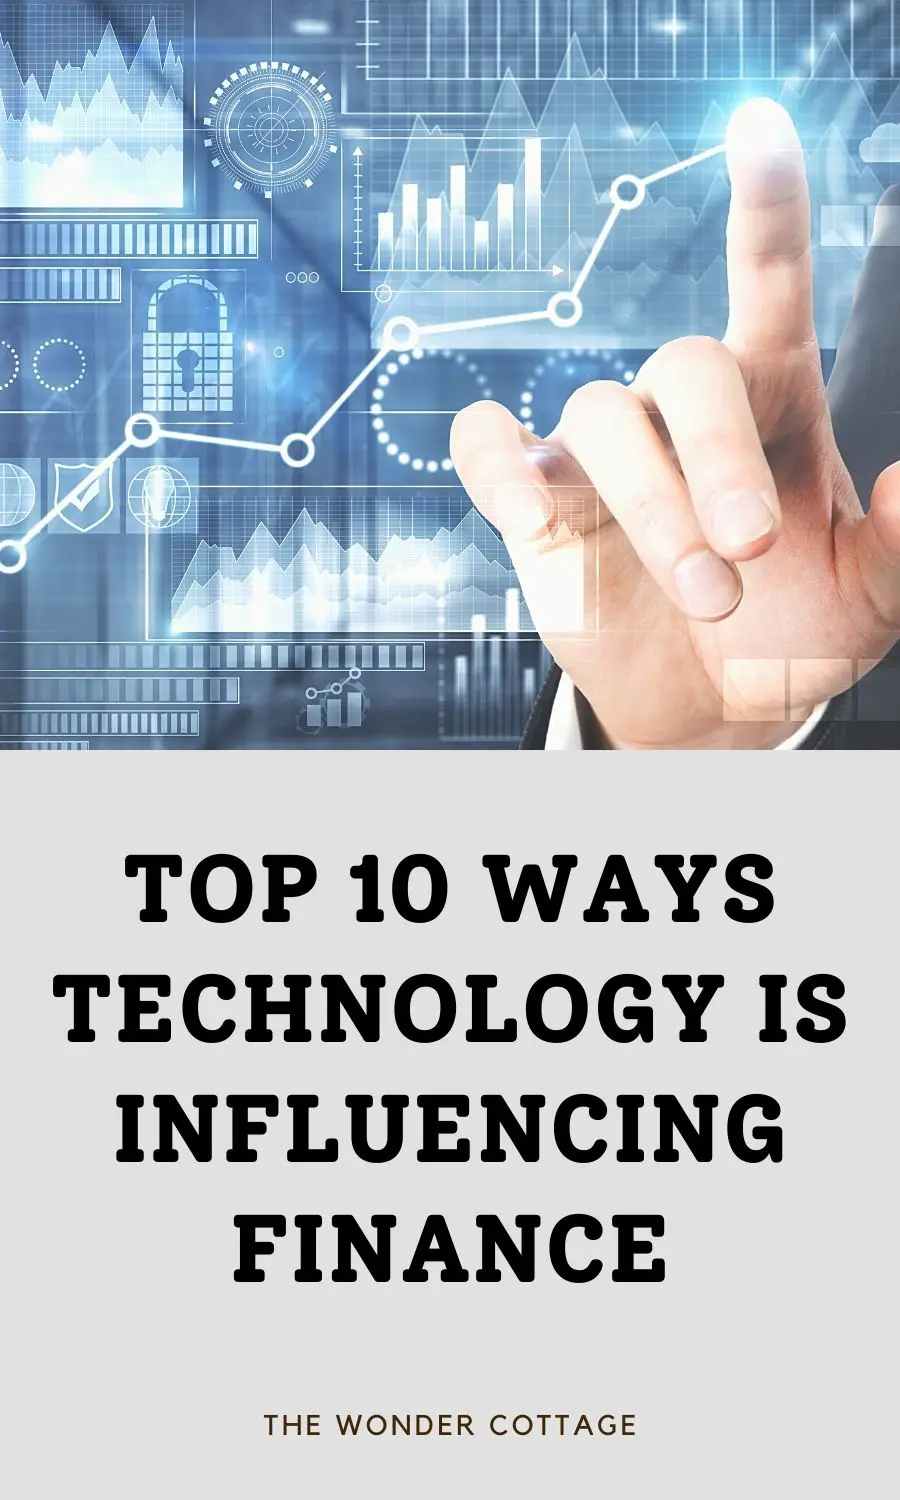 10 ways technology is influencing finance